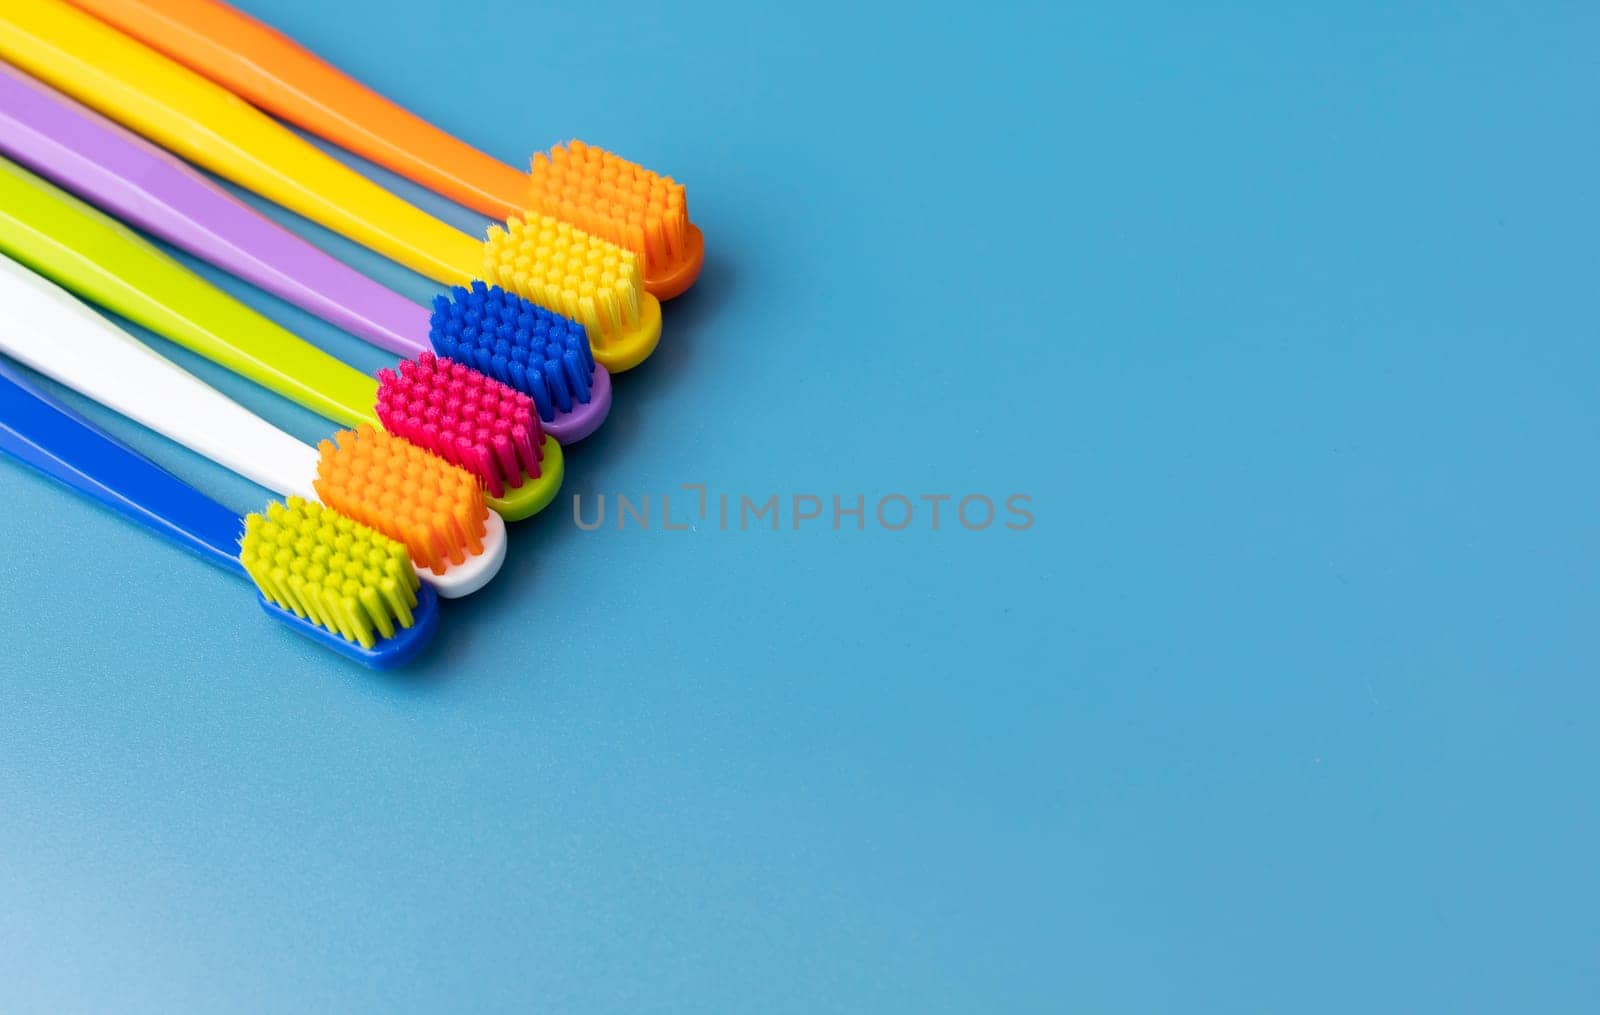 Design Set of Colorful Antibacterial Toothbrushes on Blue Background. View From Above. Copy Space For Text. Set for Dental Hygiene, Bathing Self Care Products. Horizontal Plane. High quality photo